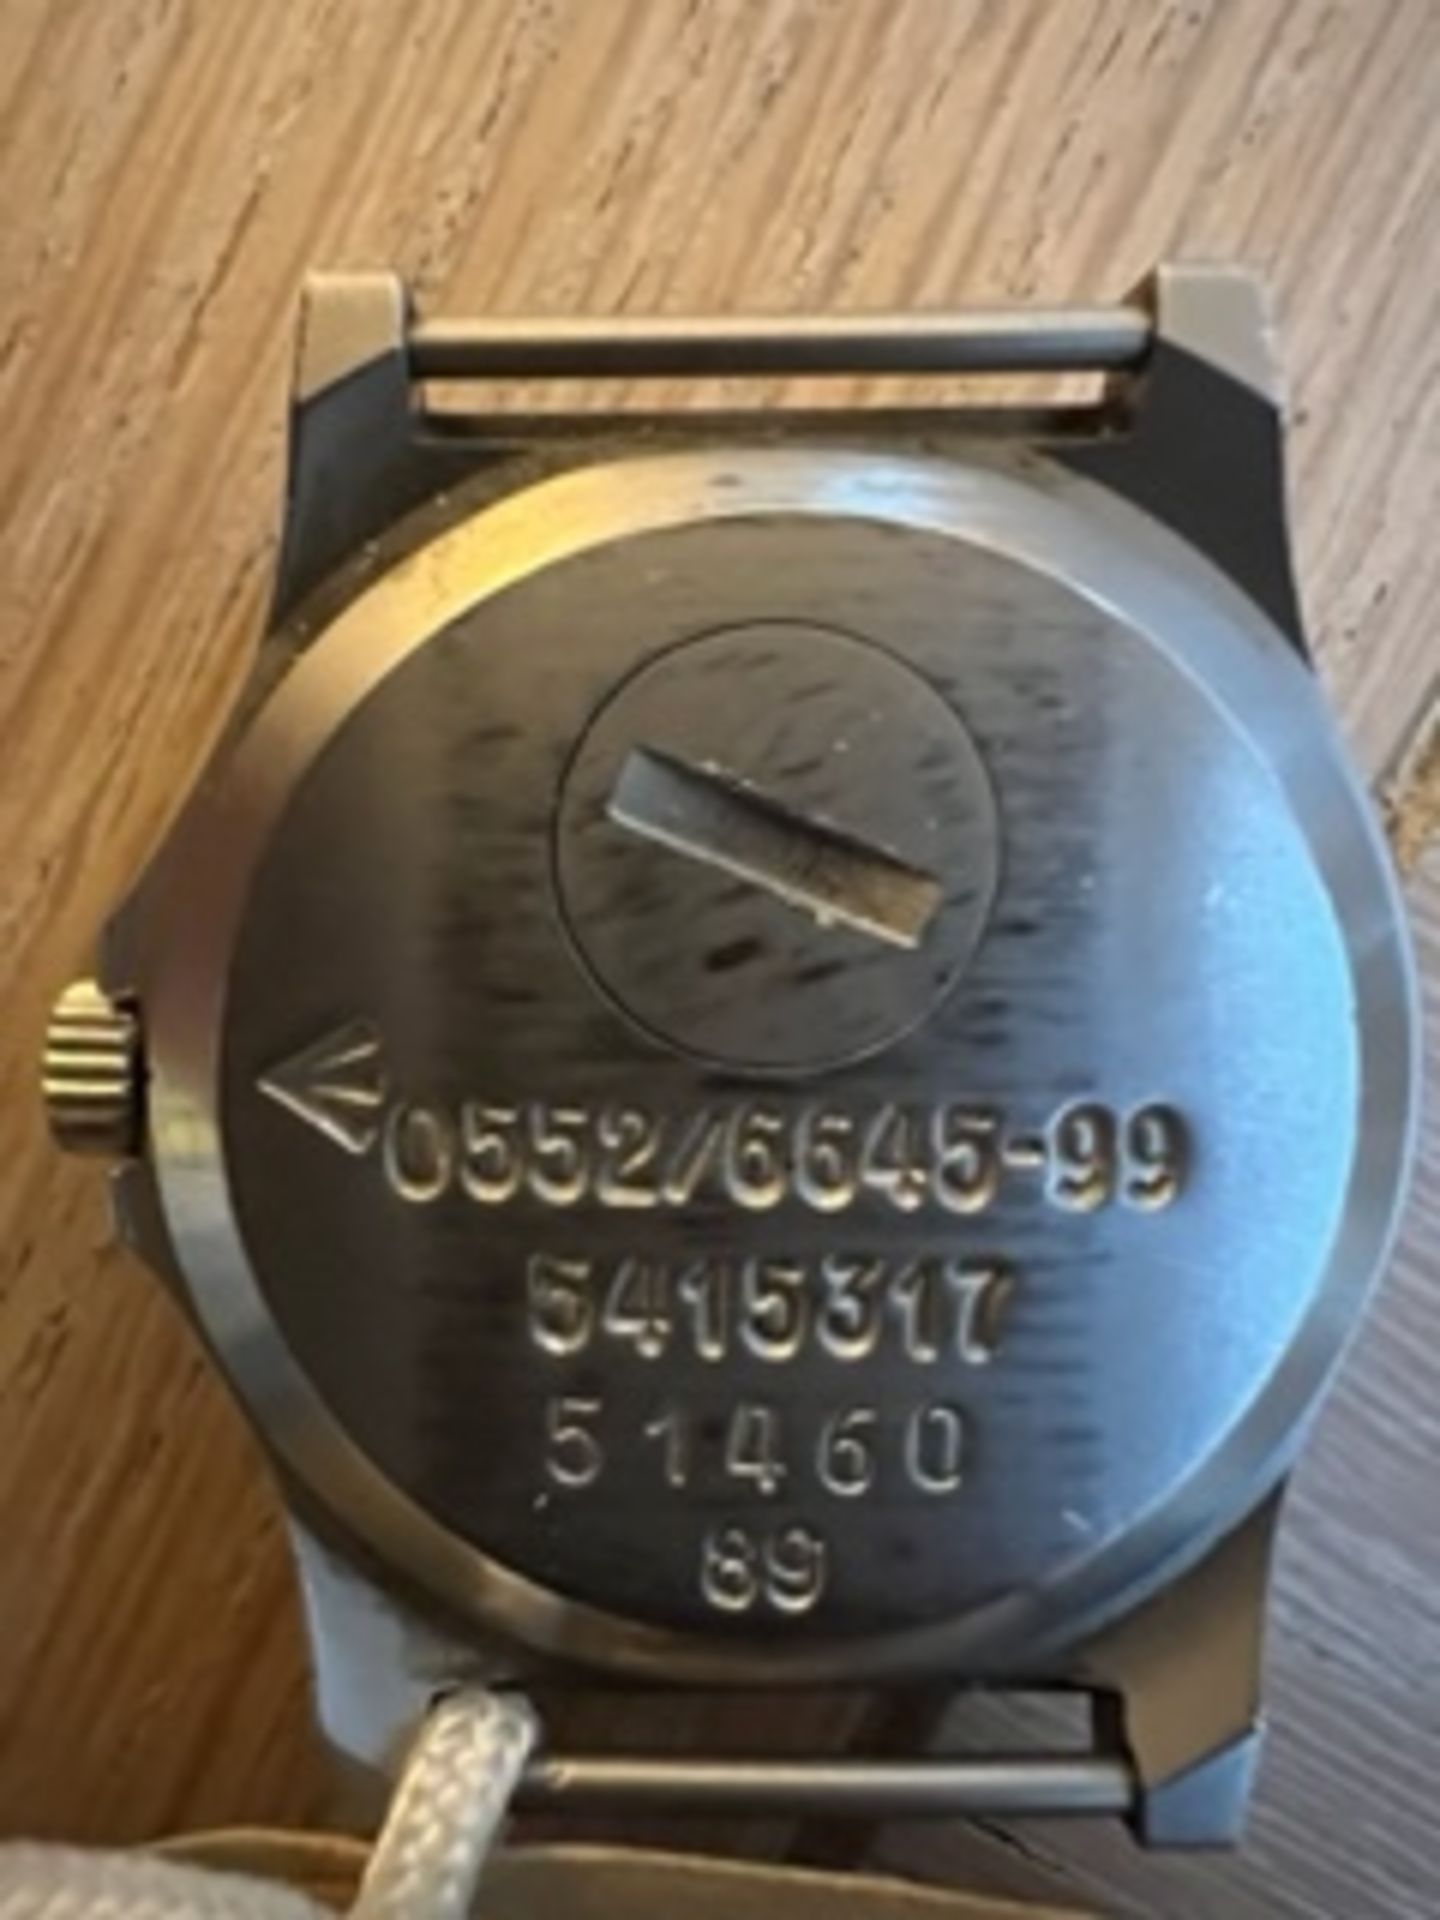 RARE CWC 0552 R. MARINES ISSUE SERVICE WATCH NATO MARKS DATE 1989 NEW BATTERY FITTED - Image 4 of 6